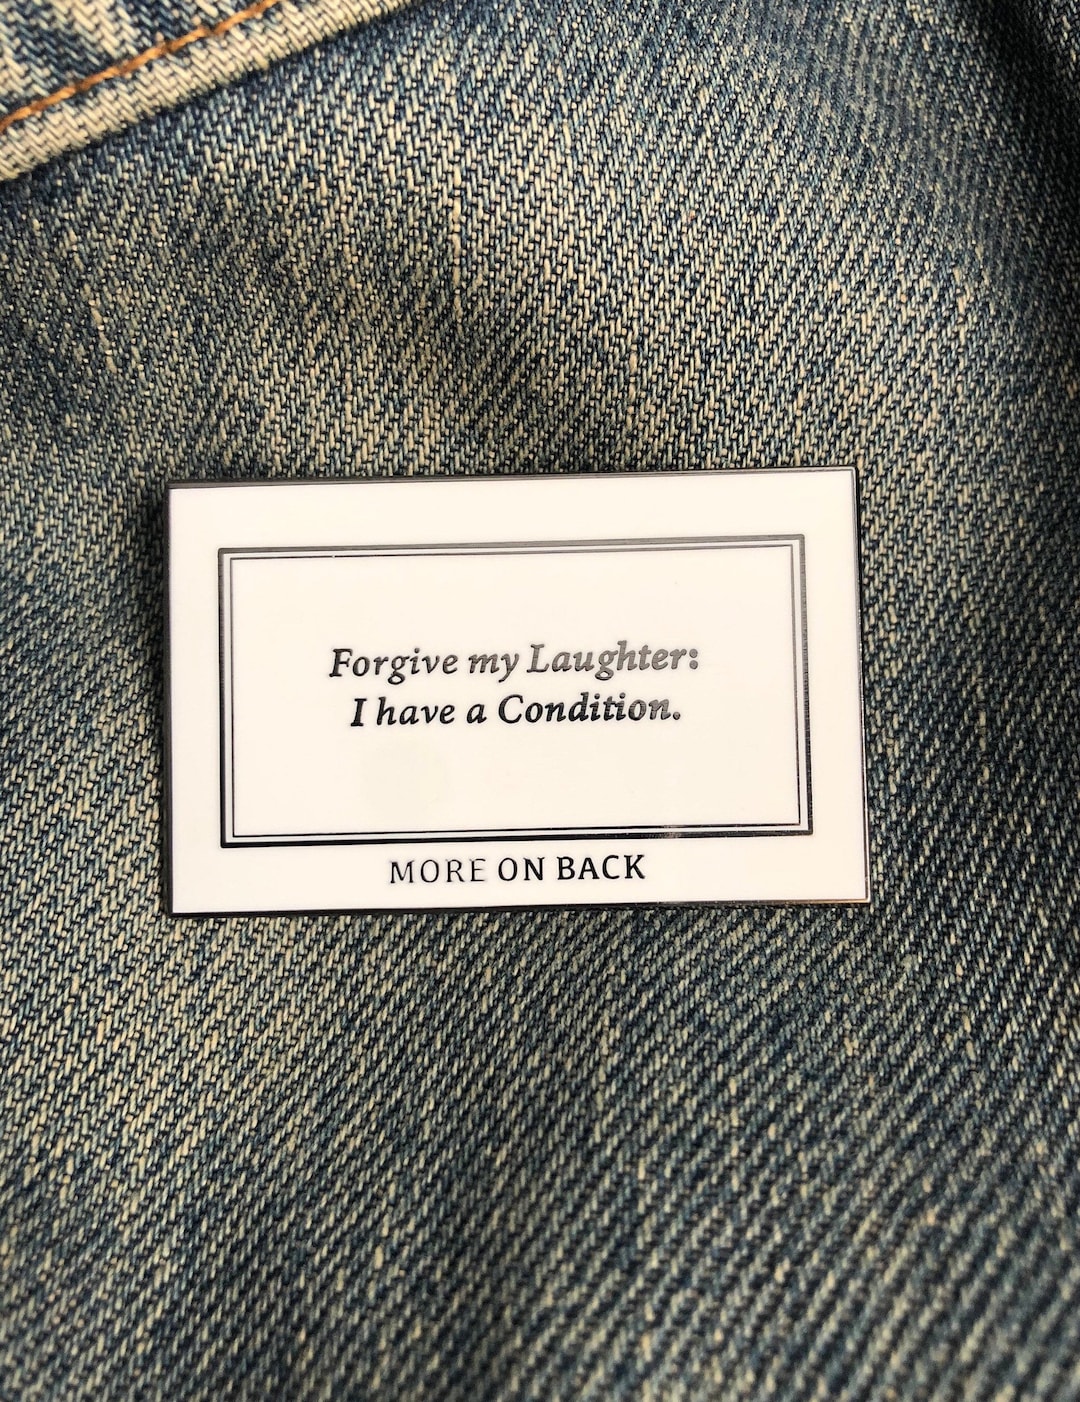 JOKER Inspired forgive My Laughter Business Card Pin - Etsy